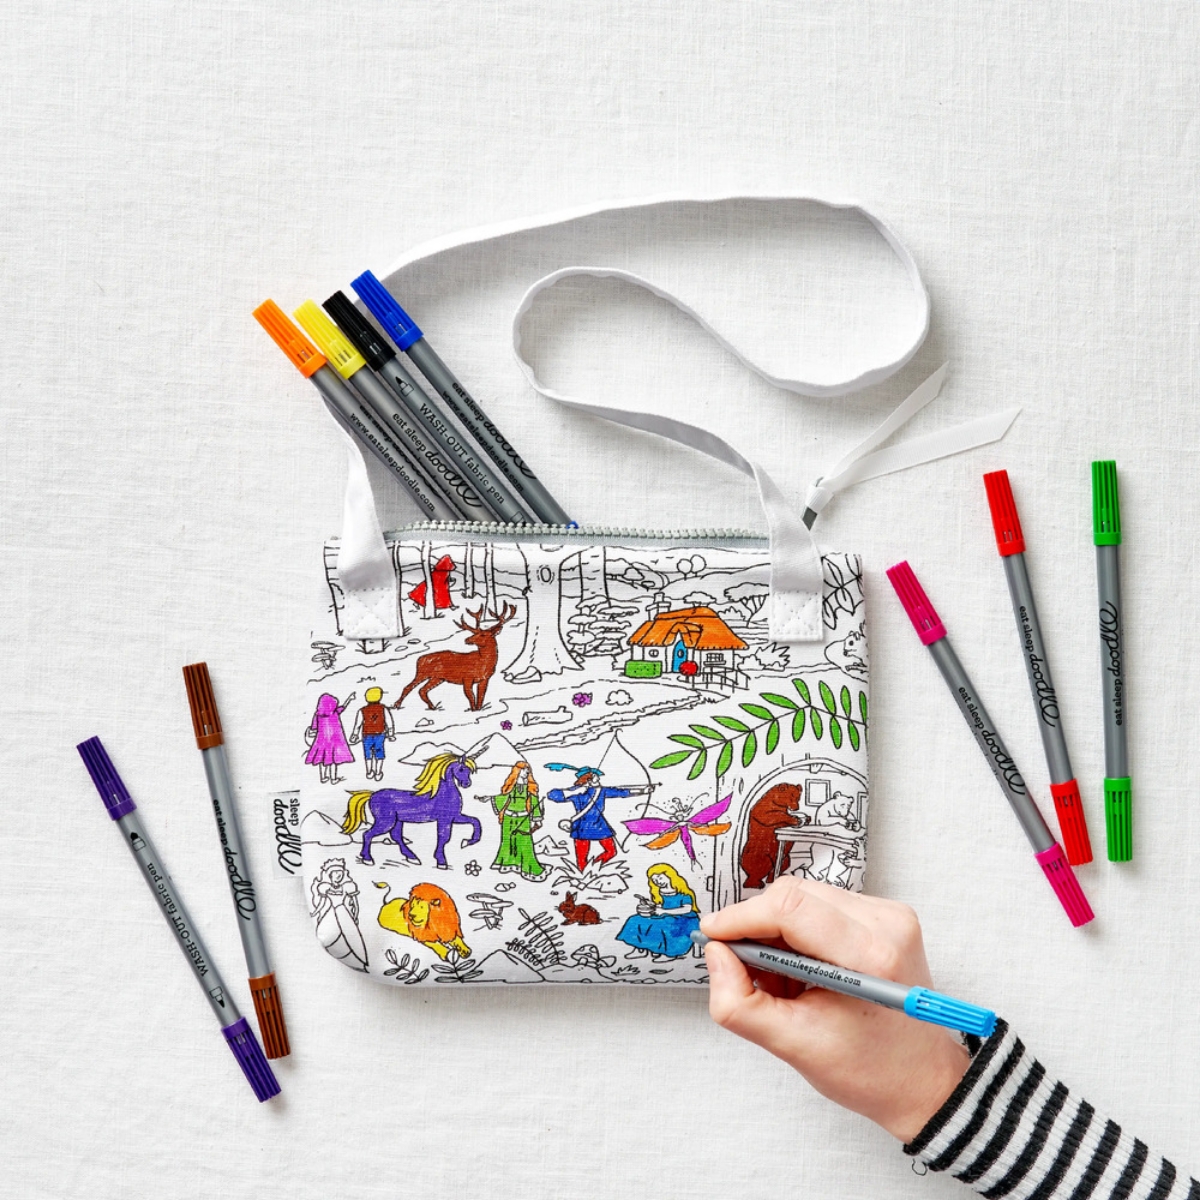 coolthings.com.au/colour-and-lea… Colour and Learn Fairytales and Legends Crossbody Bag #EatSleepDoodle #CreativeKids #FairyTaleFun #ColourAndLearn #CreativeGifts #ScreenFreePlay #ReusableArt #ArtisticAdventures #KidsOnTheGo #MagicalLearning #bethecoolestgiftgiver